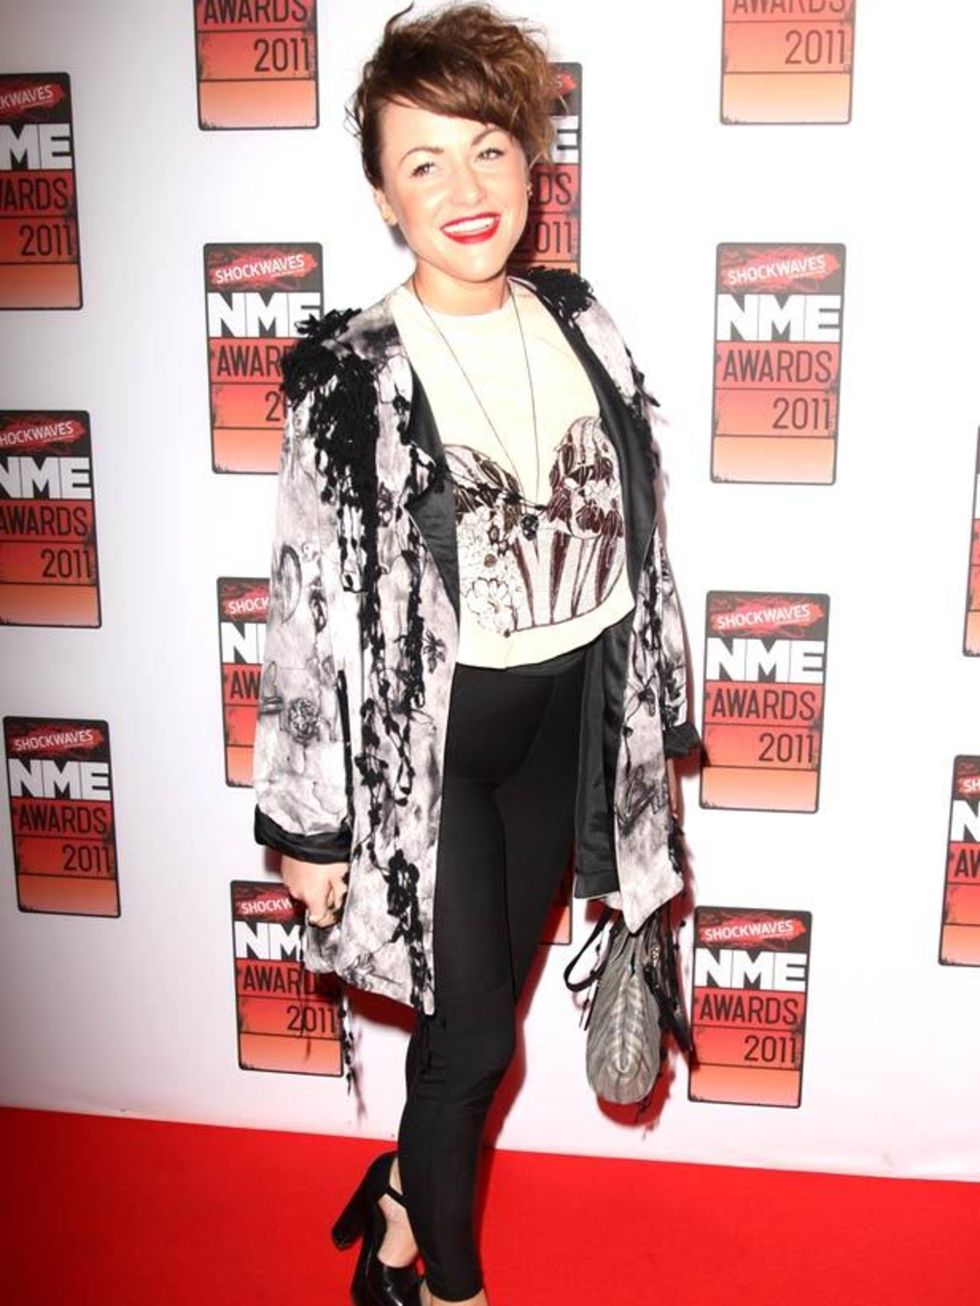 <p><a href="http://www.elleuk.com/starstyle/style-files/%28section%29/jaime-winstone">Jaime Winstone</a> at the NME Awards, 23 February 2011</p>